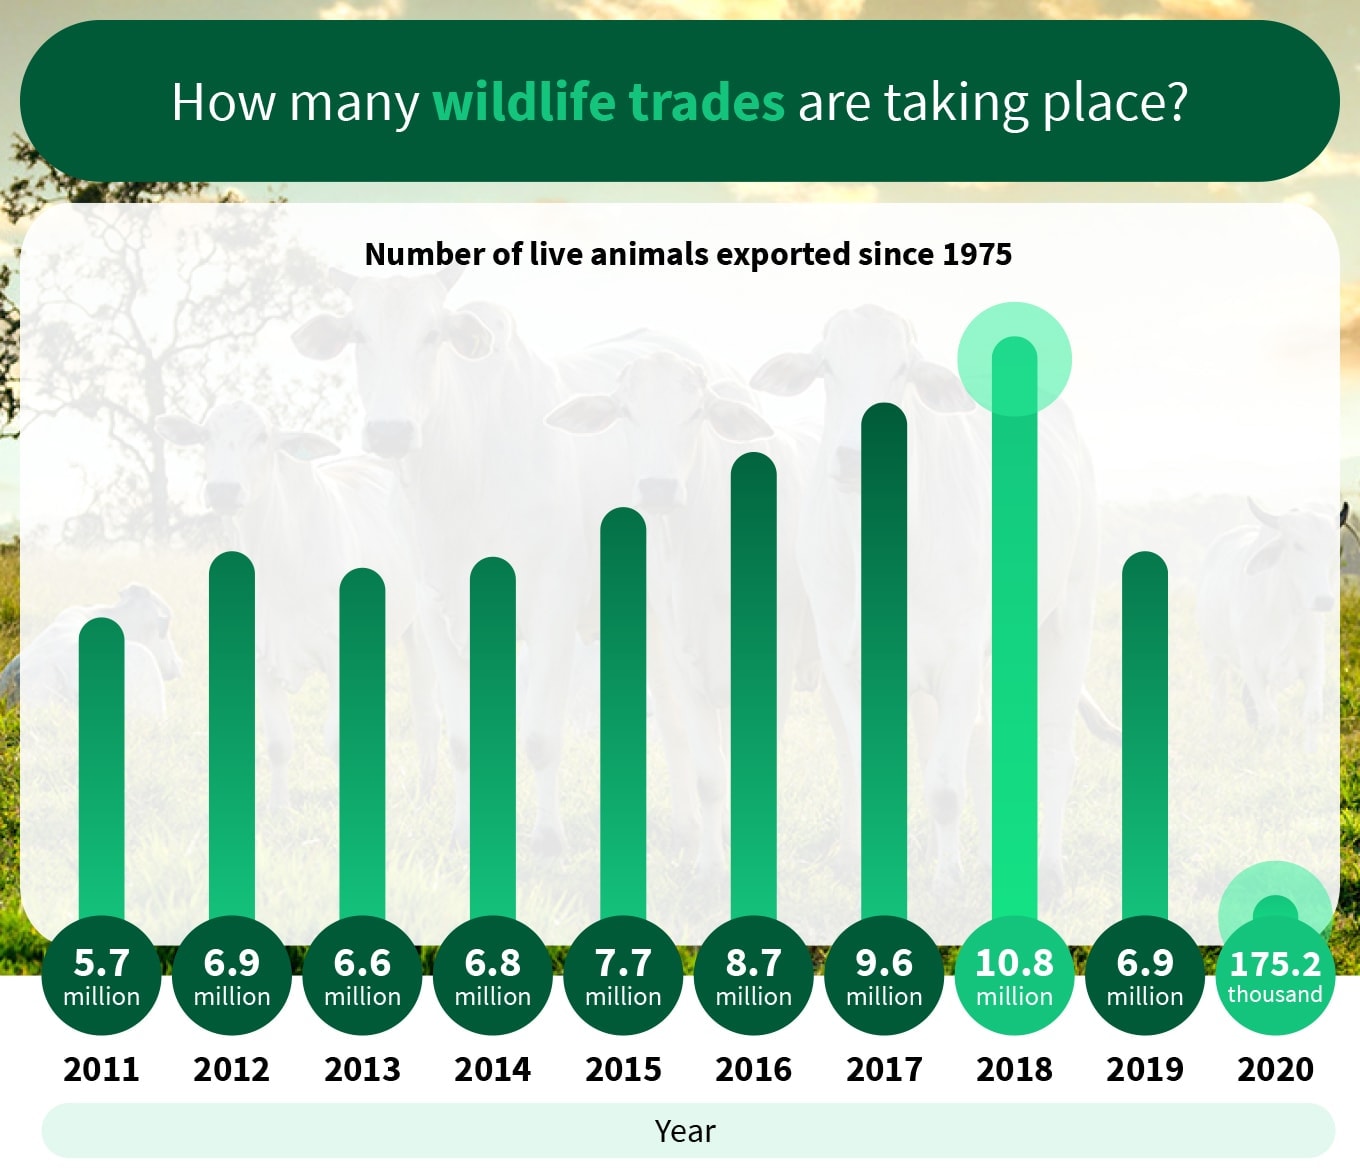 chart about how many wildlife trades are talking place since 1975